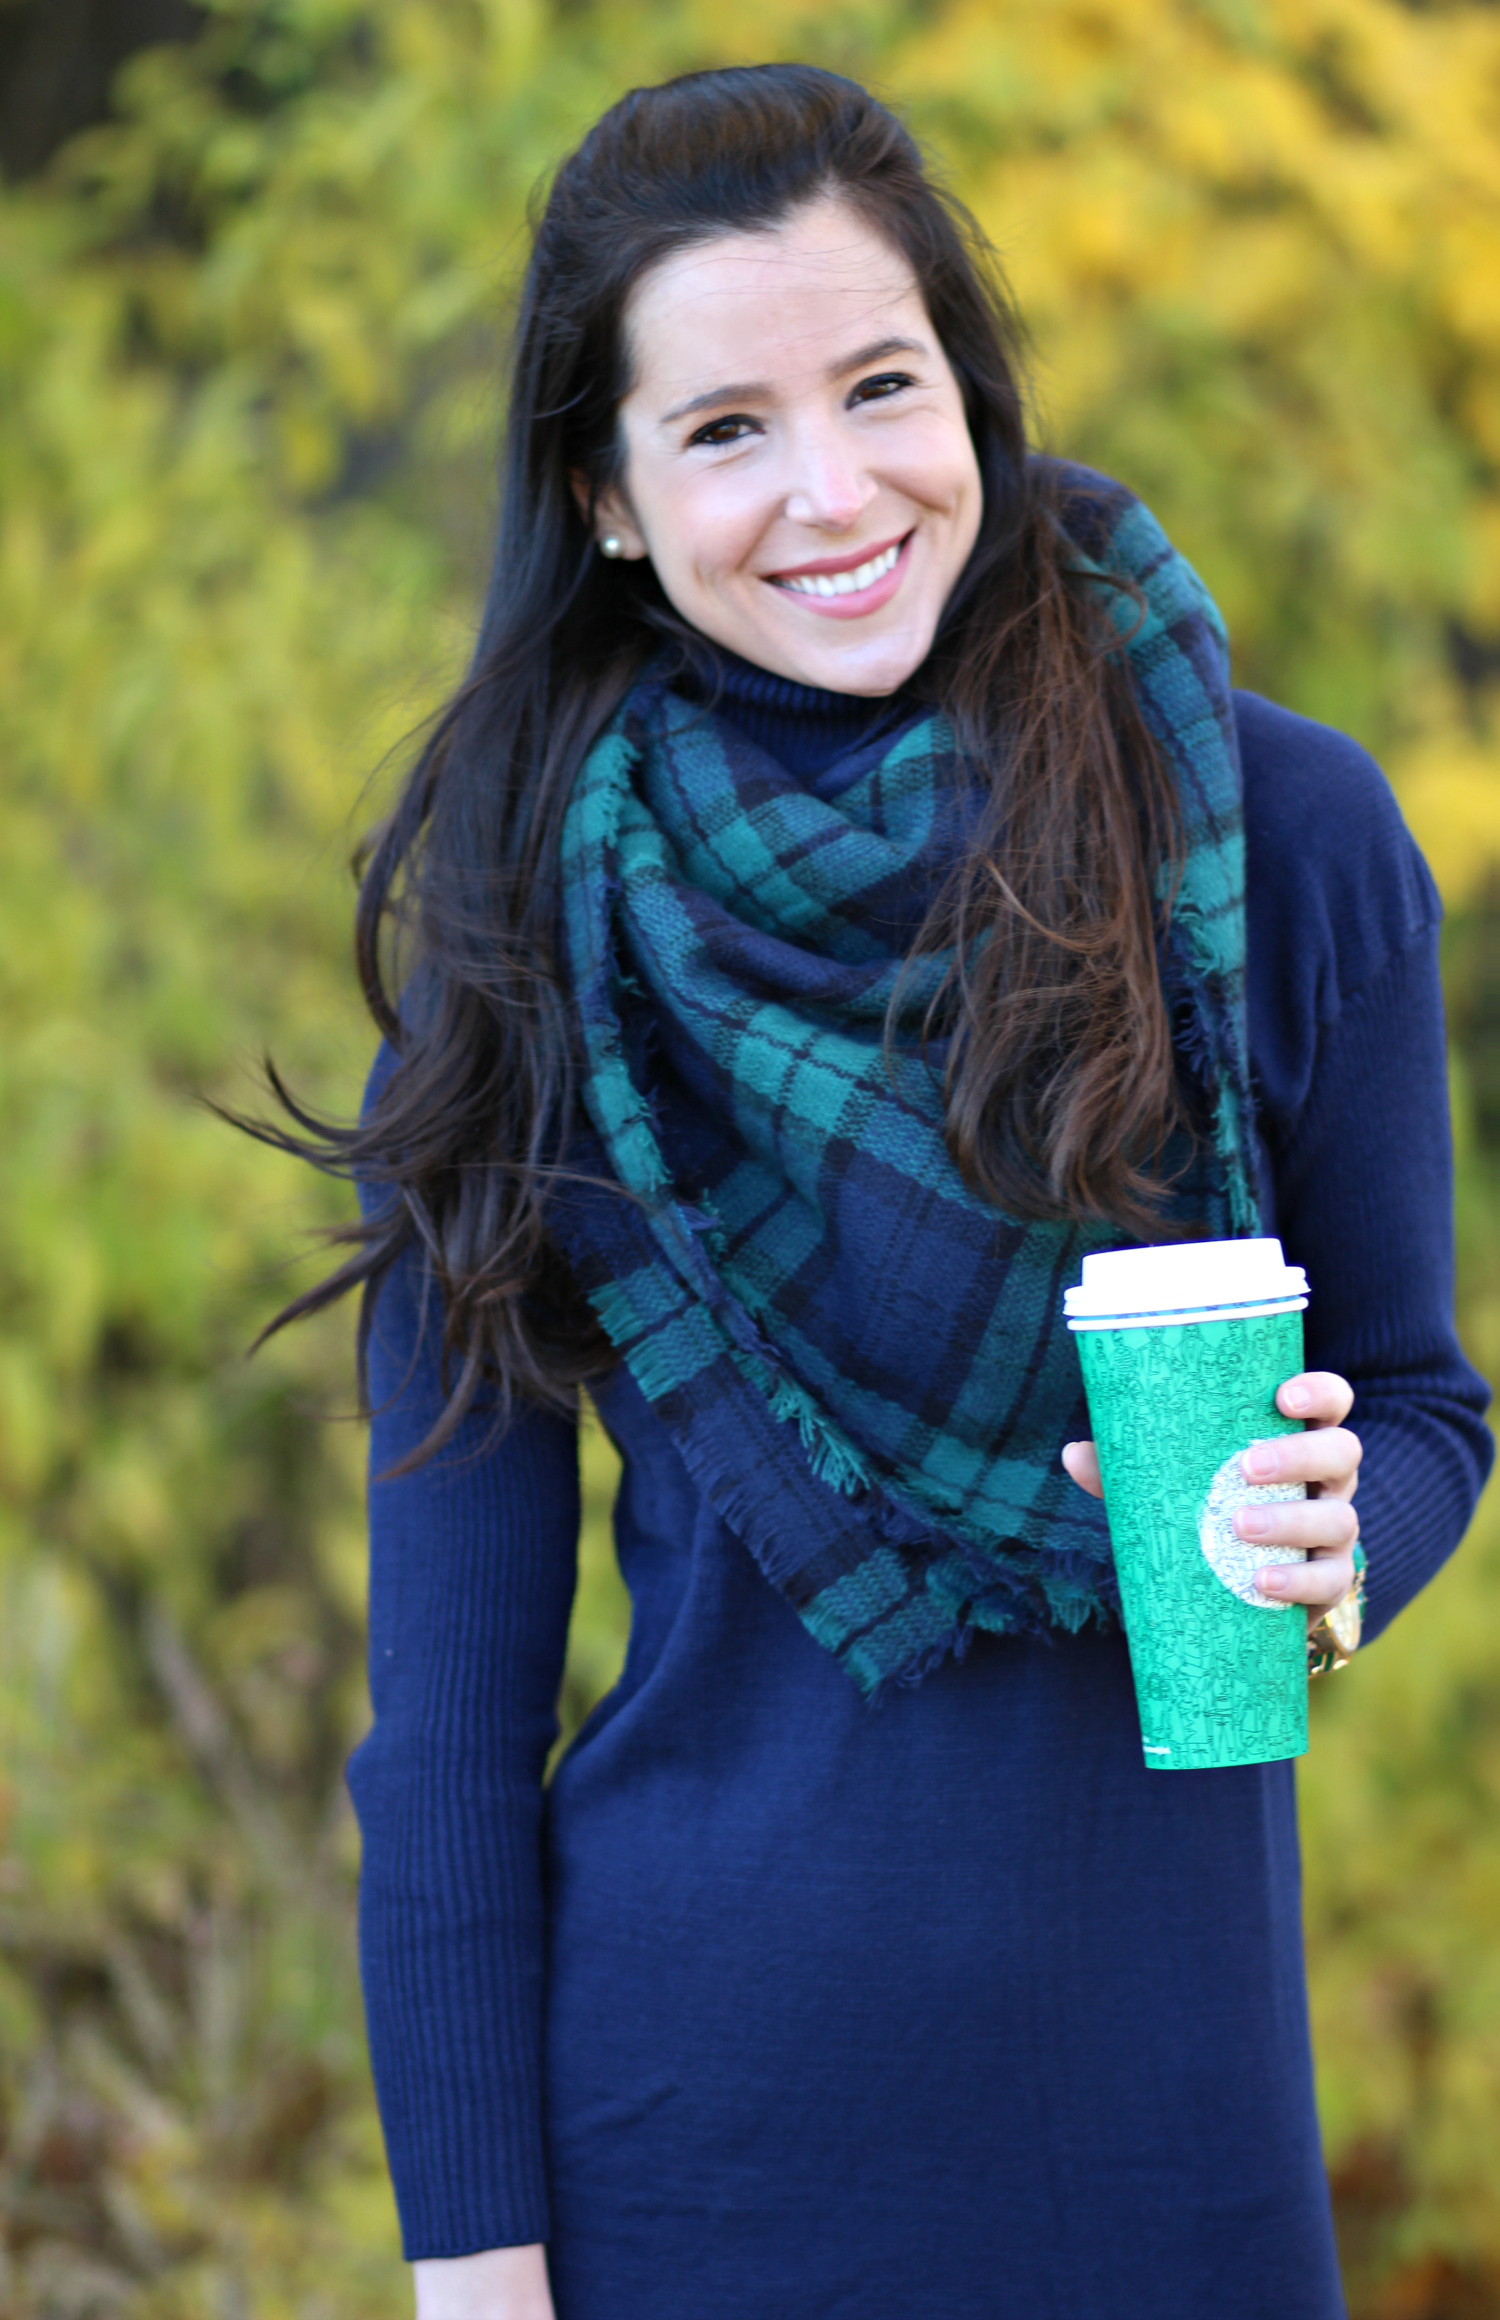 Healthy smile tips with classic navy turtleneck sweater dress outfit details